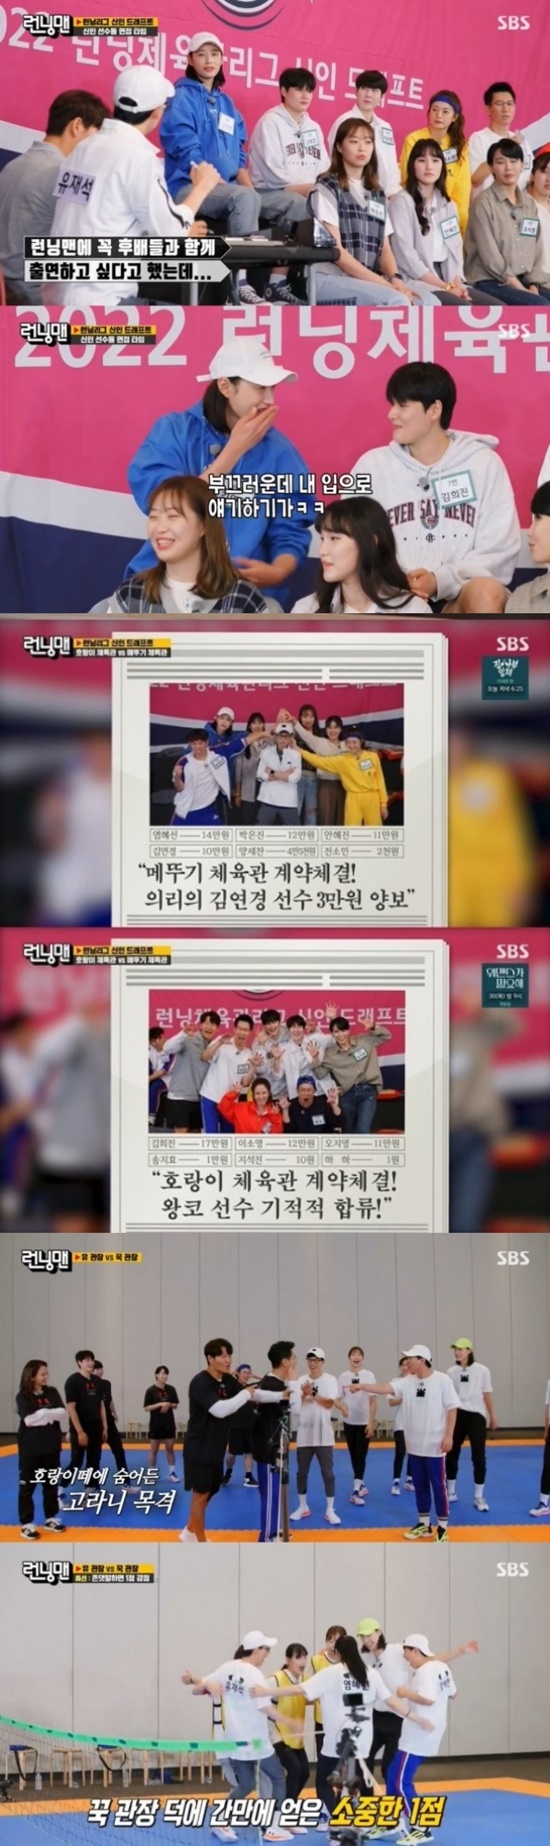 Running Man, which aired on the 26th, recorded 6.3% of TV viewer ratings (hereinafter provided by Nielsen Korea, based on households in the metropolitan area).Also, the highest TV viewer ratings per minute jumped to 9.4 percent.The broadcast was decorated with 2022 Running UEFA Champions League Rookie Draft and the womens volleyball team Kim Yeon-koung, Kim Hee-jin, Oh Ji-young, Yeum Hye-Seon, Park Eun-jin, Ahn Hye-jin and Lee So-young appeared The sun cheered everyone.Kim Yeon-koung said, I hear a lot of stories about Lee Kwang-soo, I will fill the vacancy today.The draft, which was made up of a surprise progress by Jung Woo-young caster, was made up of a team with Yoo Jae-Suk, who was born as the director according to the race result last week.Kim Jong-kook had to negotiate Salary with the players with 990,000 One, Yoo Jae-Suk silver 1.3 million One, and the players had to have a volleyball before the draft and have to be evaluated by Choices for speed and playing.If the Running Man members laughed, the volleyball team players showed a quick spike and showed their ability to play.Kim Hee-jin, who showed 70km / h, chose to go to the tiger gym at the top Salary 170,000 One, and Oh Ji Young, Lee So Young, Haha, Ji Suk-jin and Song Ji-hyo also joined.Kim Yeon-koung, 60km/h, offered his Salary 30,000 One to join Yang Se-chan to Choices the Grasshop Gym.Park Eun-jin, Yeum Hye-Seon, Ahn Hye-jin and Jeon So-min also headed to the grasshopper gym.The first Battle was a football: a hand-held Libero, with both teams Choices Haha and Kim Yeon-koung and added tension to the intense rally from the start.However, unexpected option honorific words came to the fore as a variable, and Kim Jong-kook and Yoo Jae-Suk, the two team managers, fell into a bad mood and laughed.Kim Jong-kook and Yoo Jae-Suk are horrified every time they make a mistake, and each time they score, they are tired of the energy of the players who show that world tension and foreshadow the tough battle of the future.In particular, Kim Yeon-koung bombarded the nagging scene when Yoo Jae-Suk made a mistake with rib blocking, and the scene took the best one minute with 9.4% of the best TV viewer ratings per minute.Next weeks broadcast was predicted to be a sparking battle for both gymnasts along with the final results of the foot volleyball Battle.Running Man airs every Sunday at 5pm.Photo = SBS Broadcasting Screen